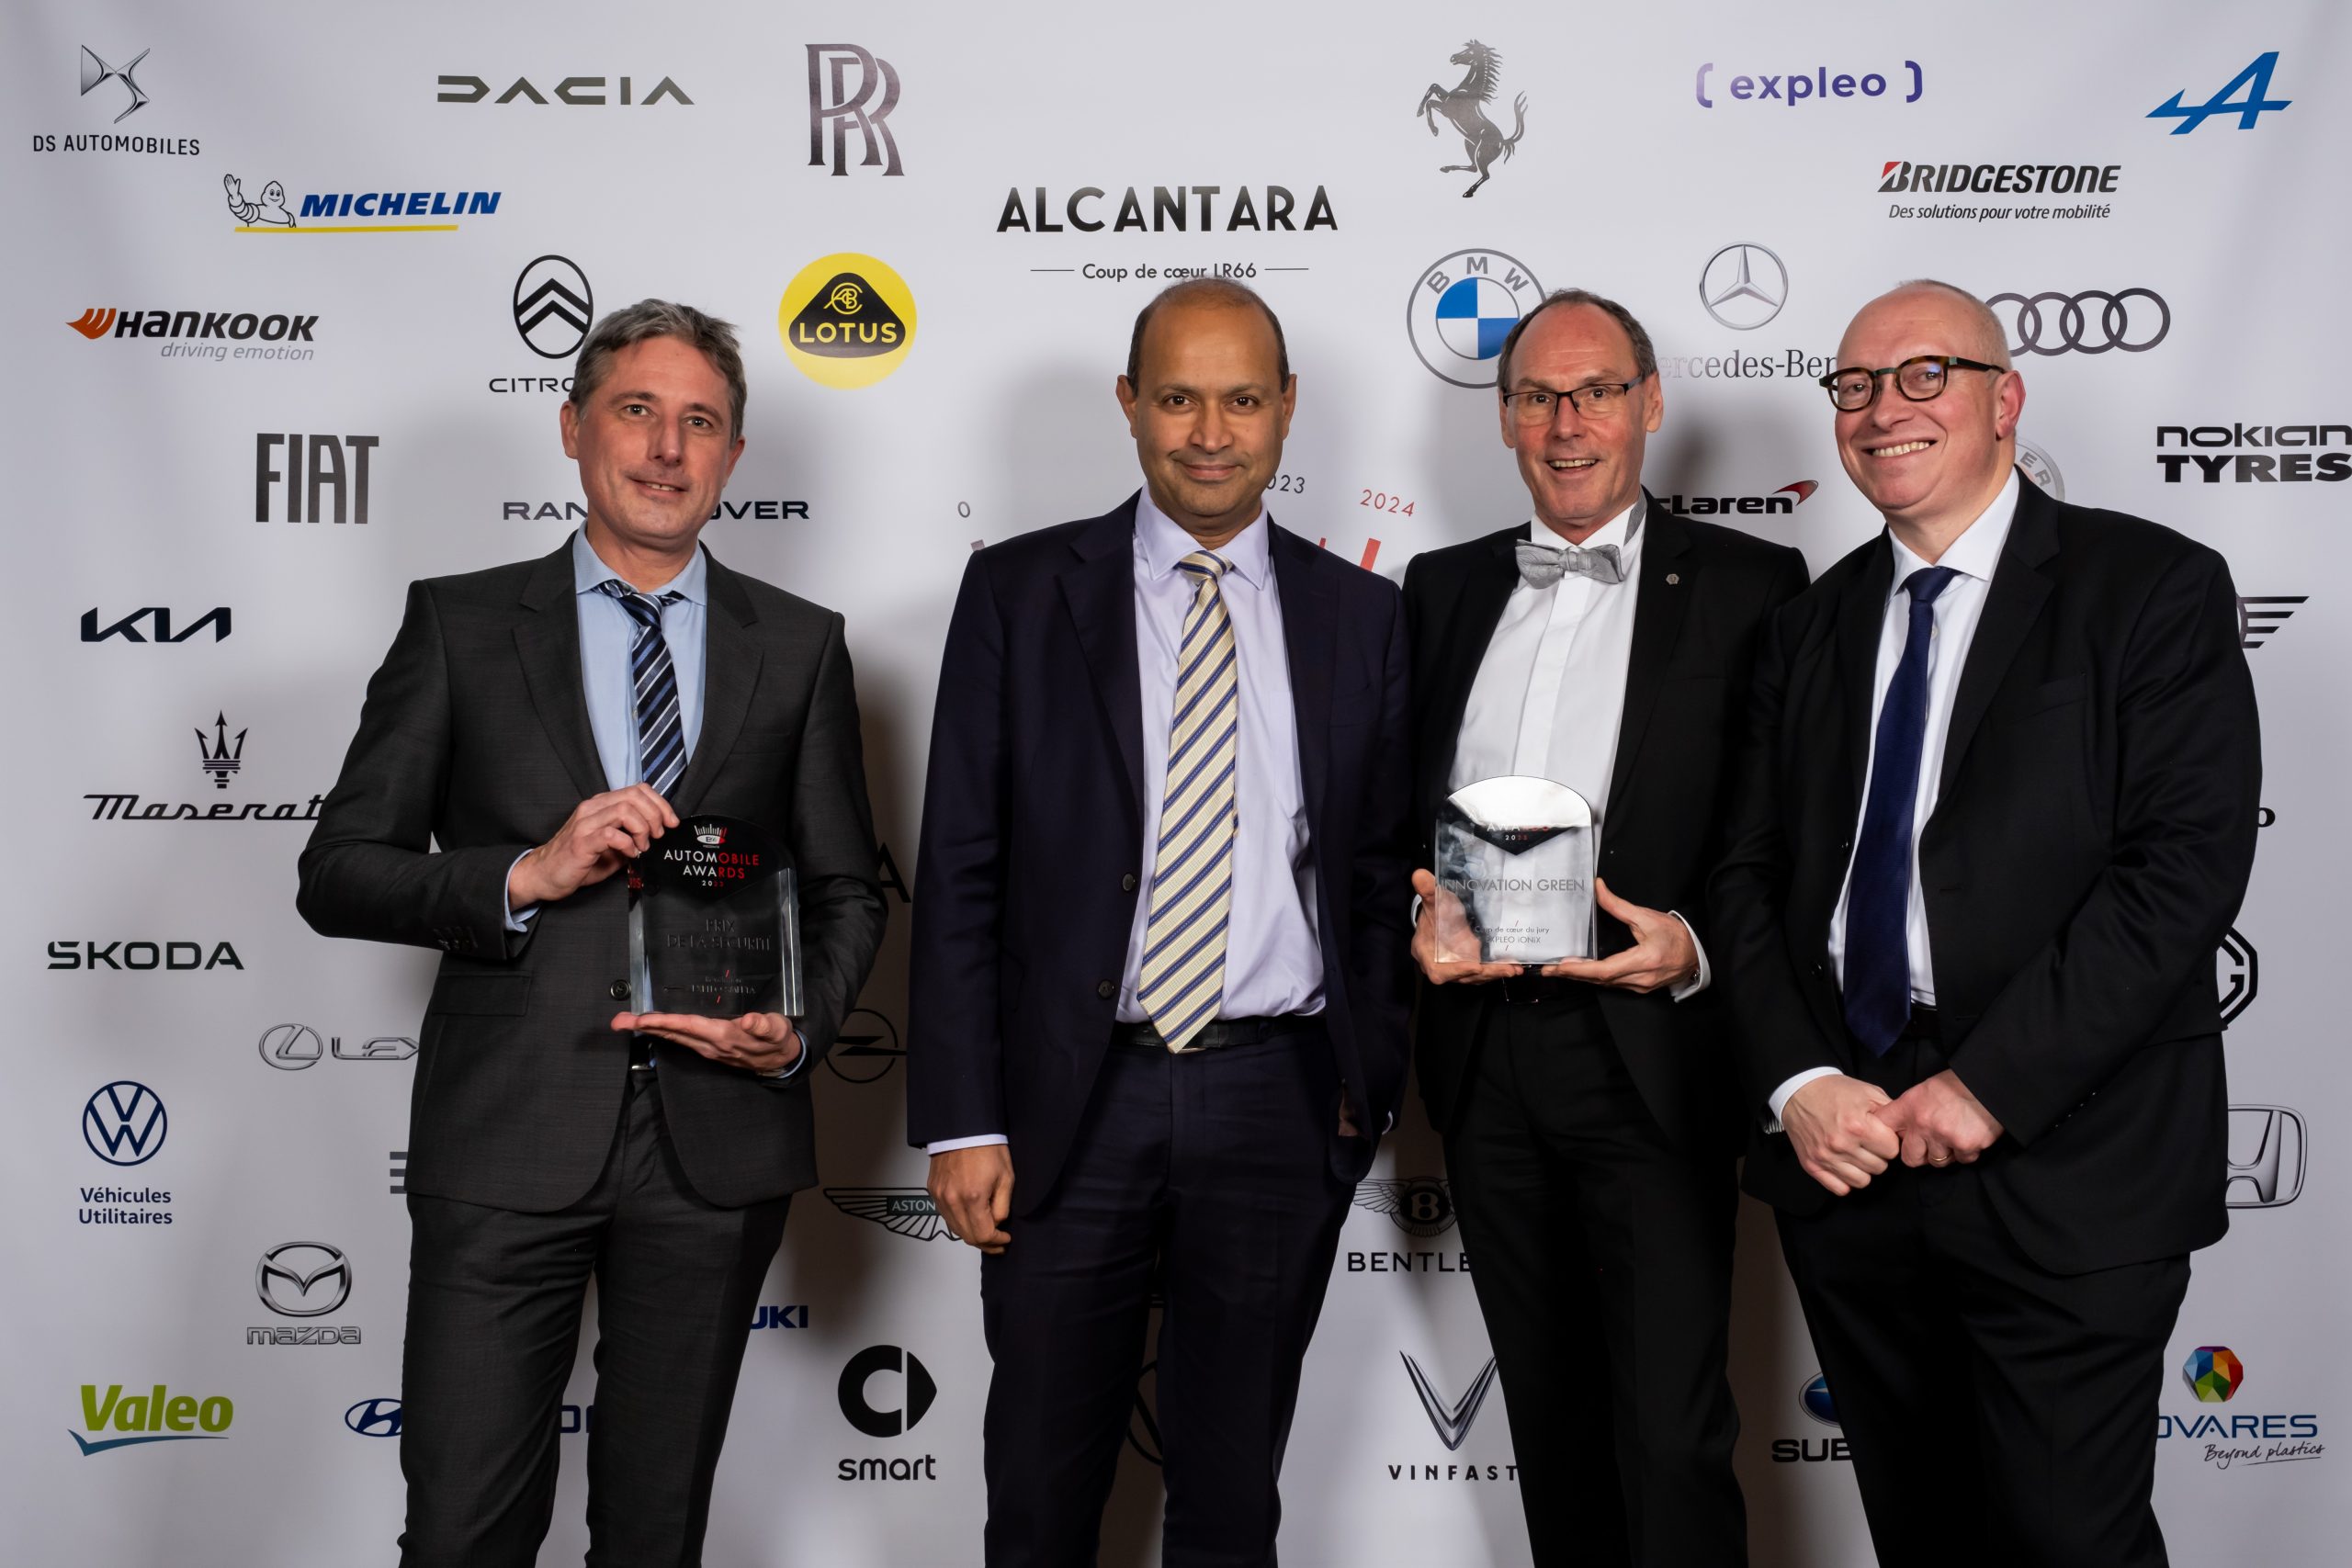 Four businessmen holding awards pose together, smiling at the Expleo Innovations Automobile Awards event, with logos of automotive companies and sponsors in the background.